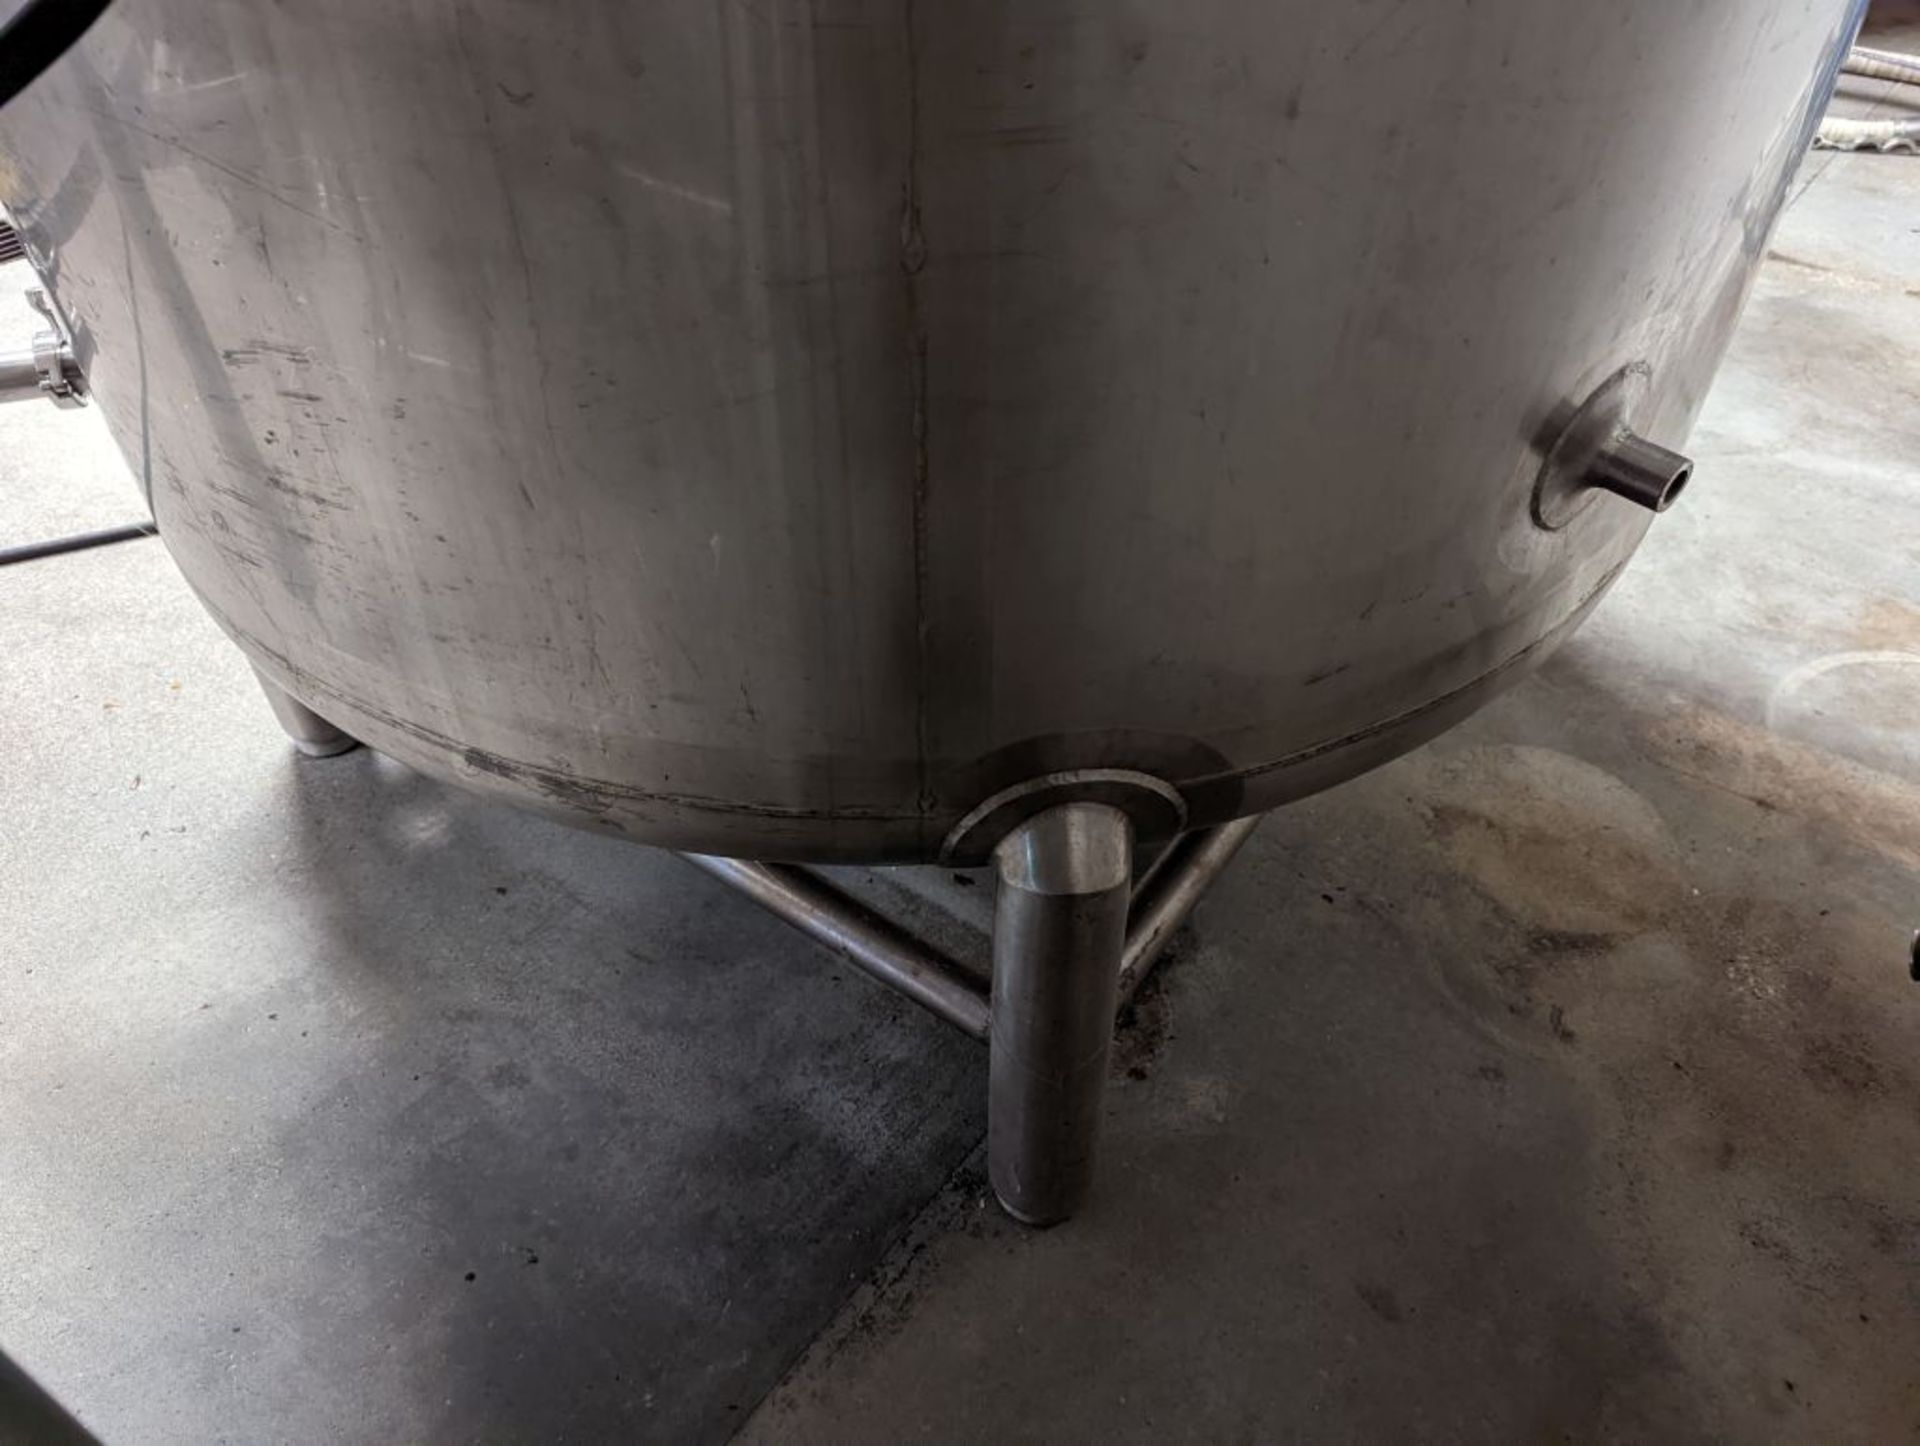 20 BBL Brite Beer Tank w/Fittings | Tag: 232545 - Image 5 of 6